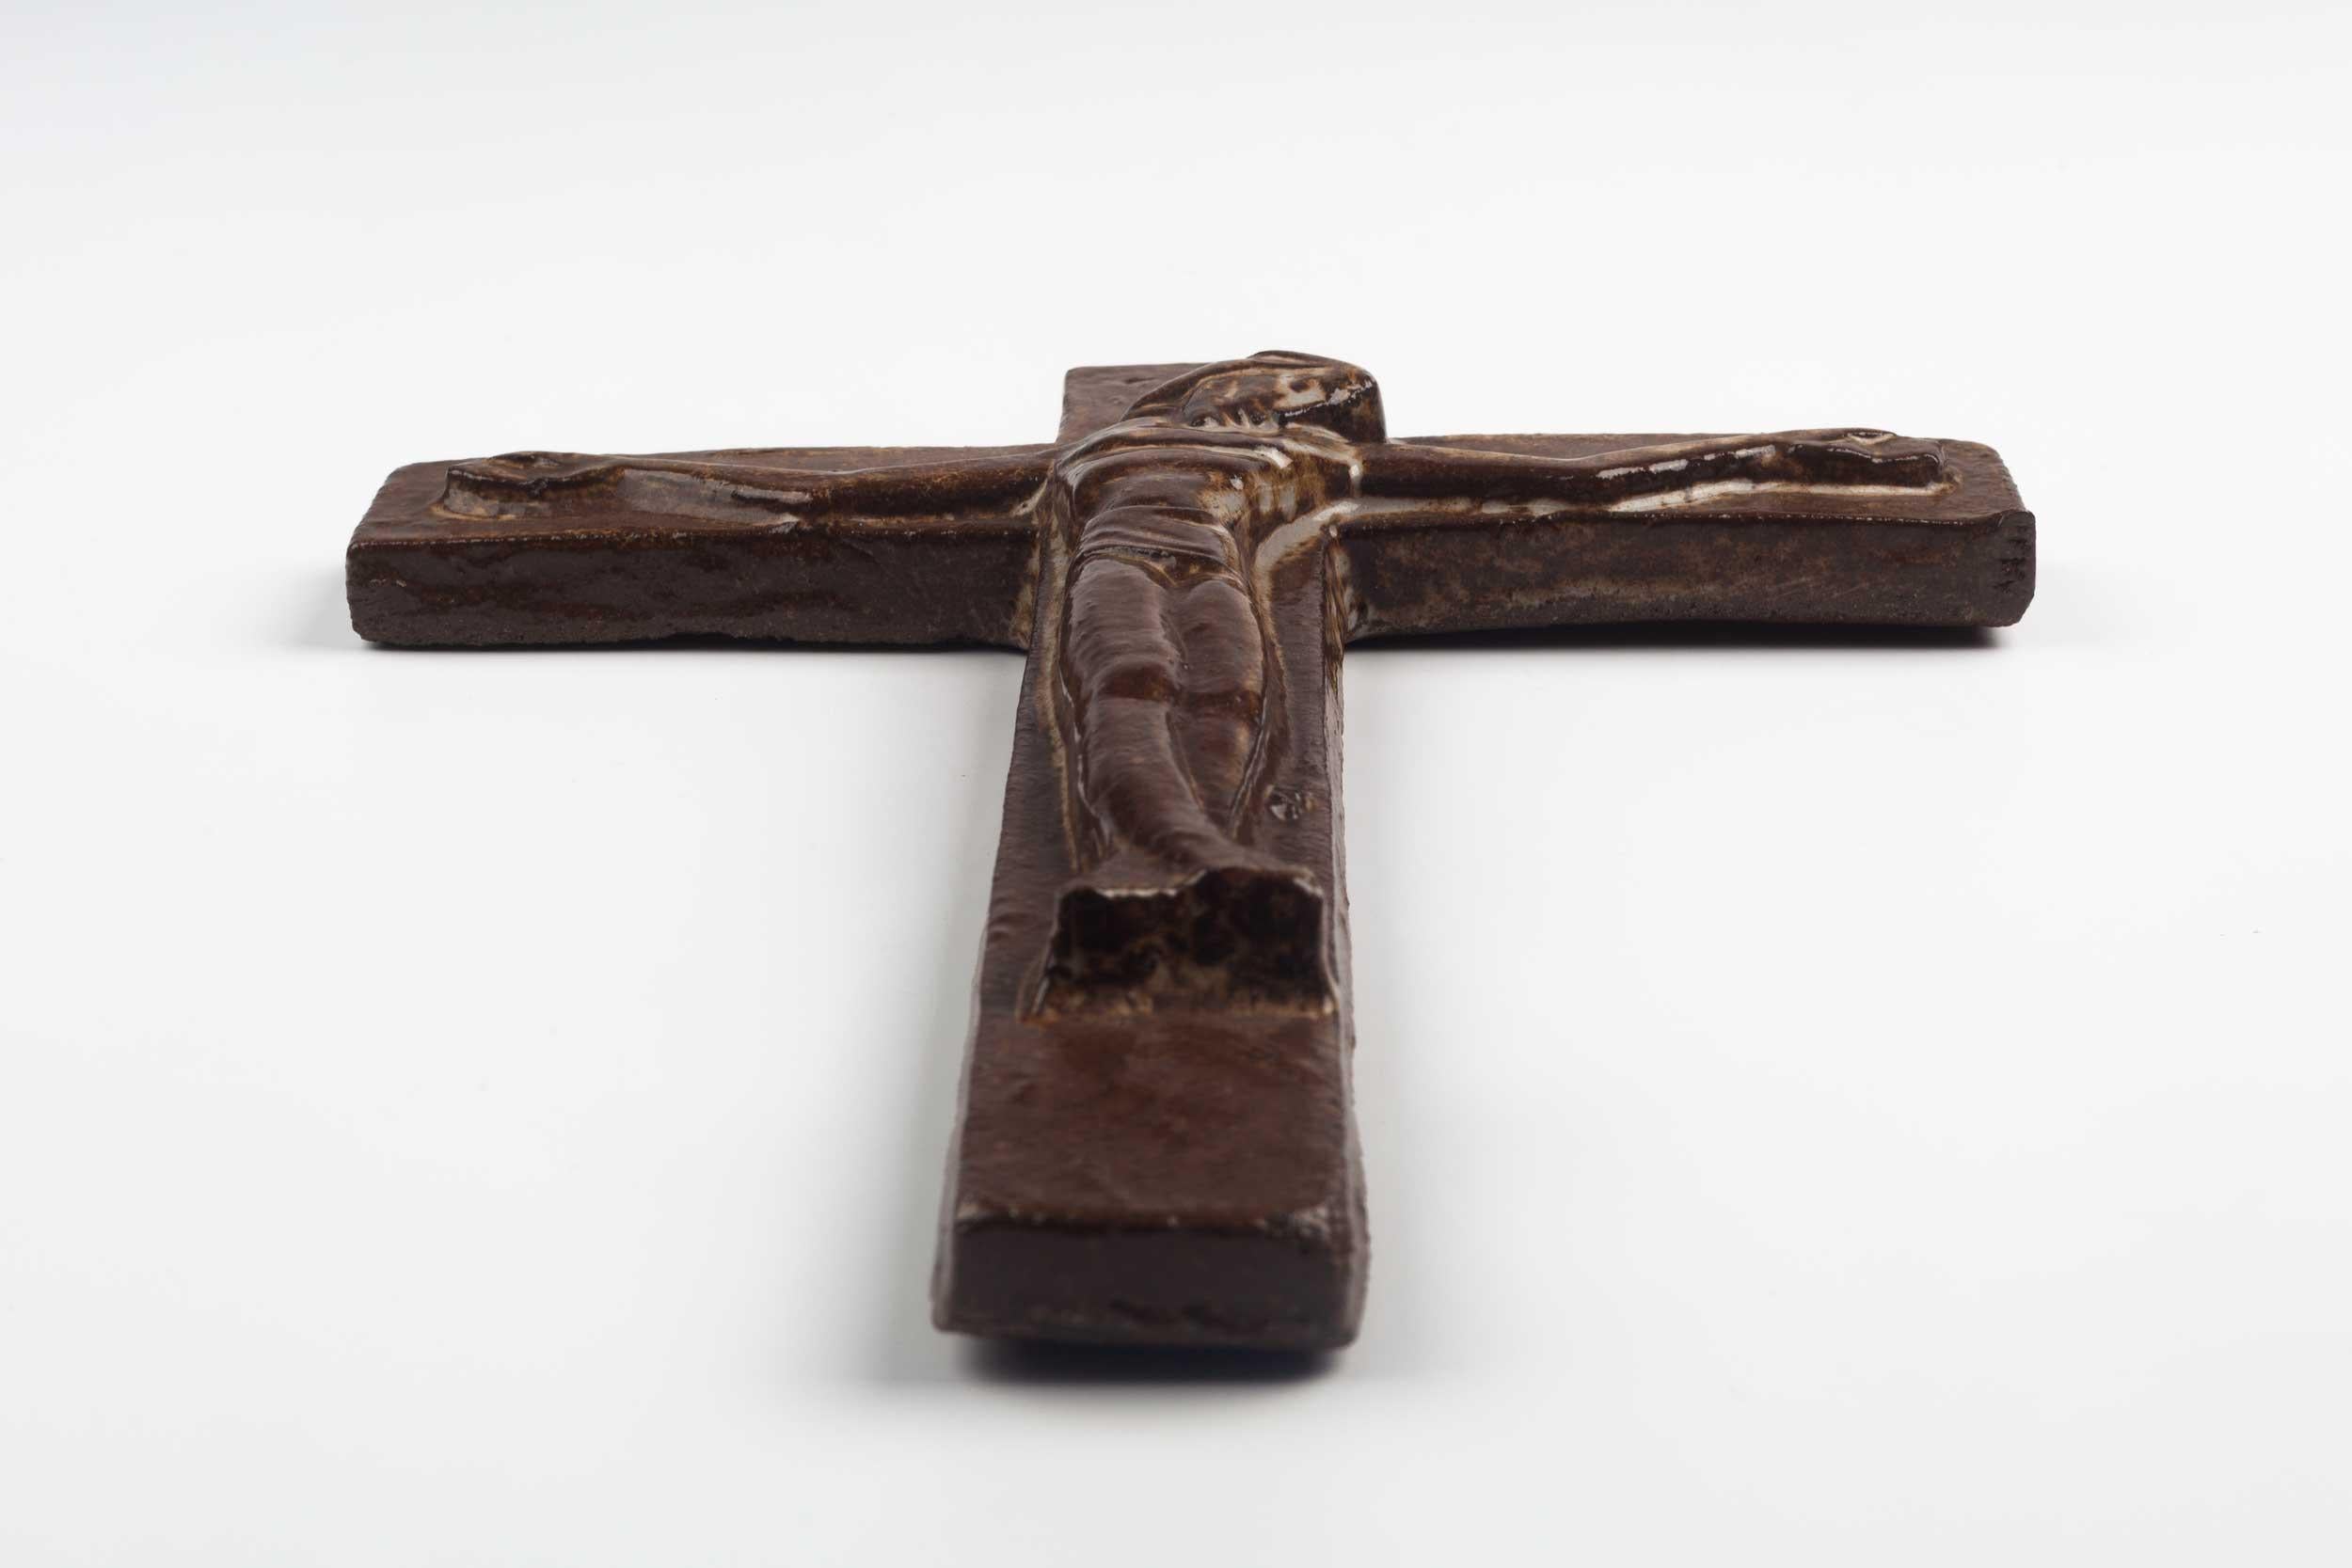 Belgian wall cross in ceramic, hand painted in semi-gloss earthy brown with abstract Christ figure in volume.

From modernism to brutalism, the crosses in our collection range from being as Futurist as a modernist church to as raw as a Brutalist